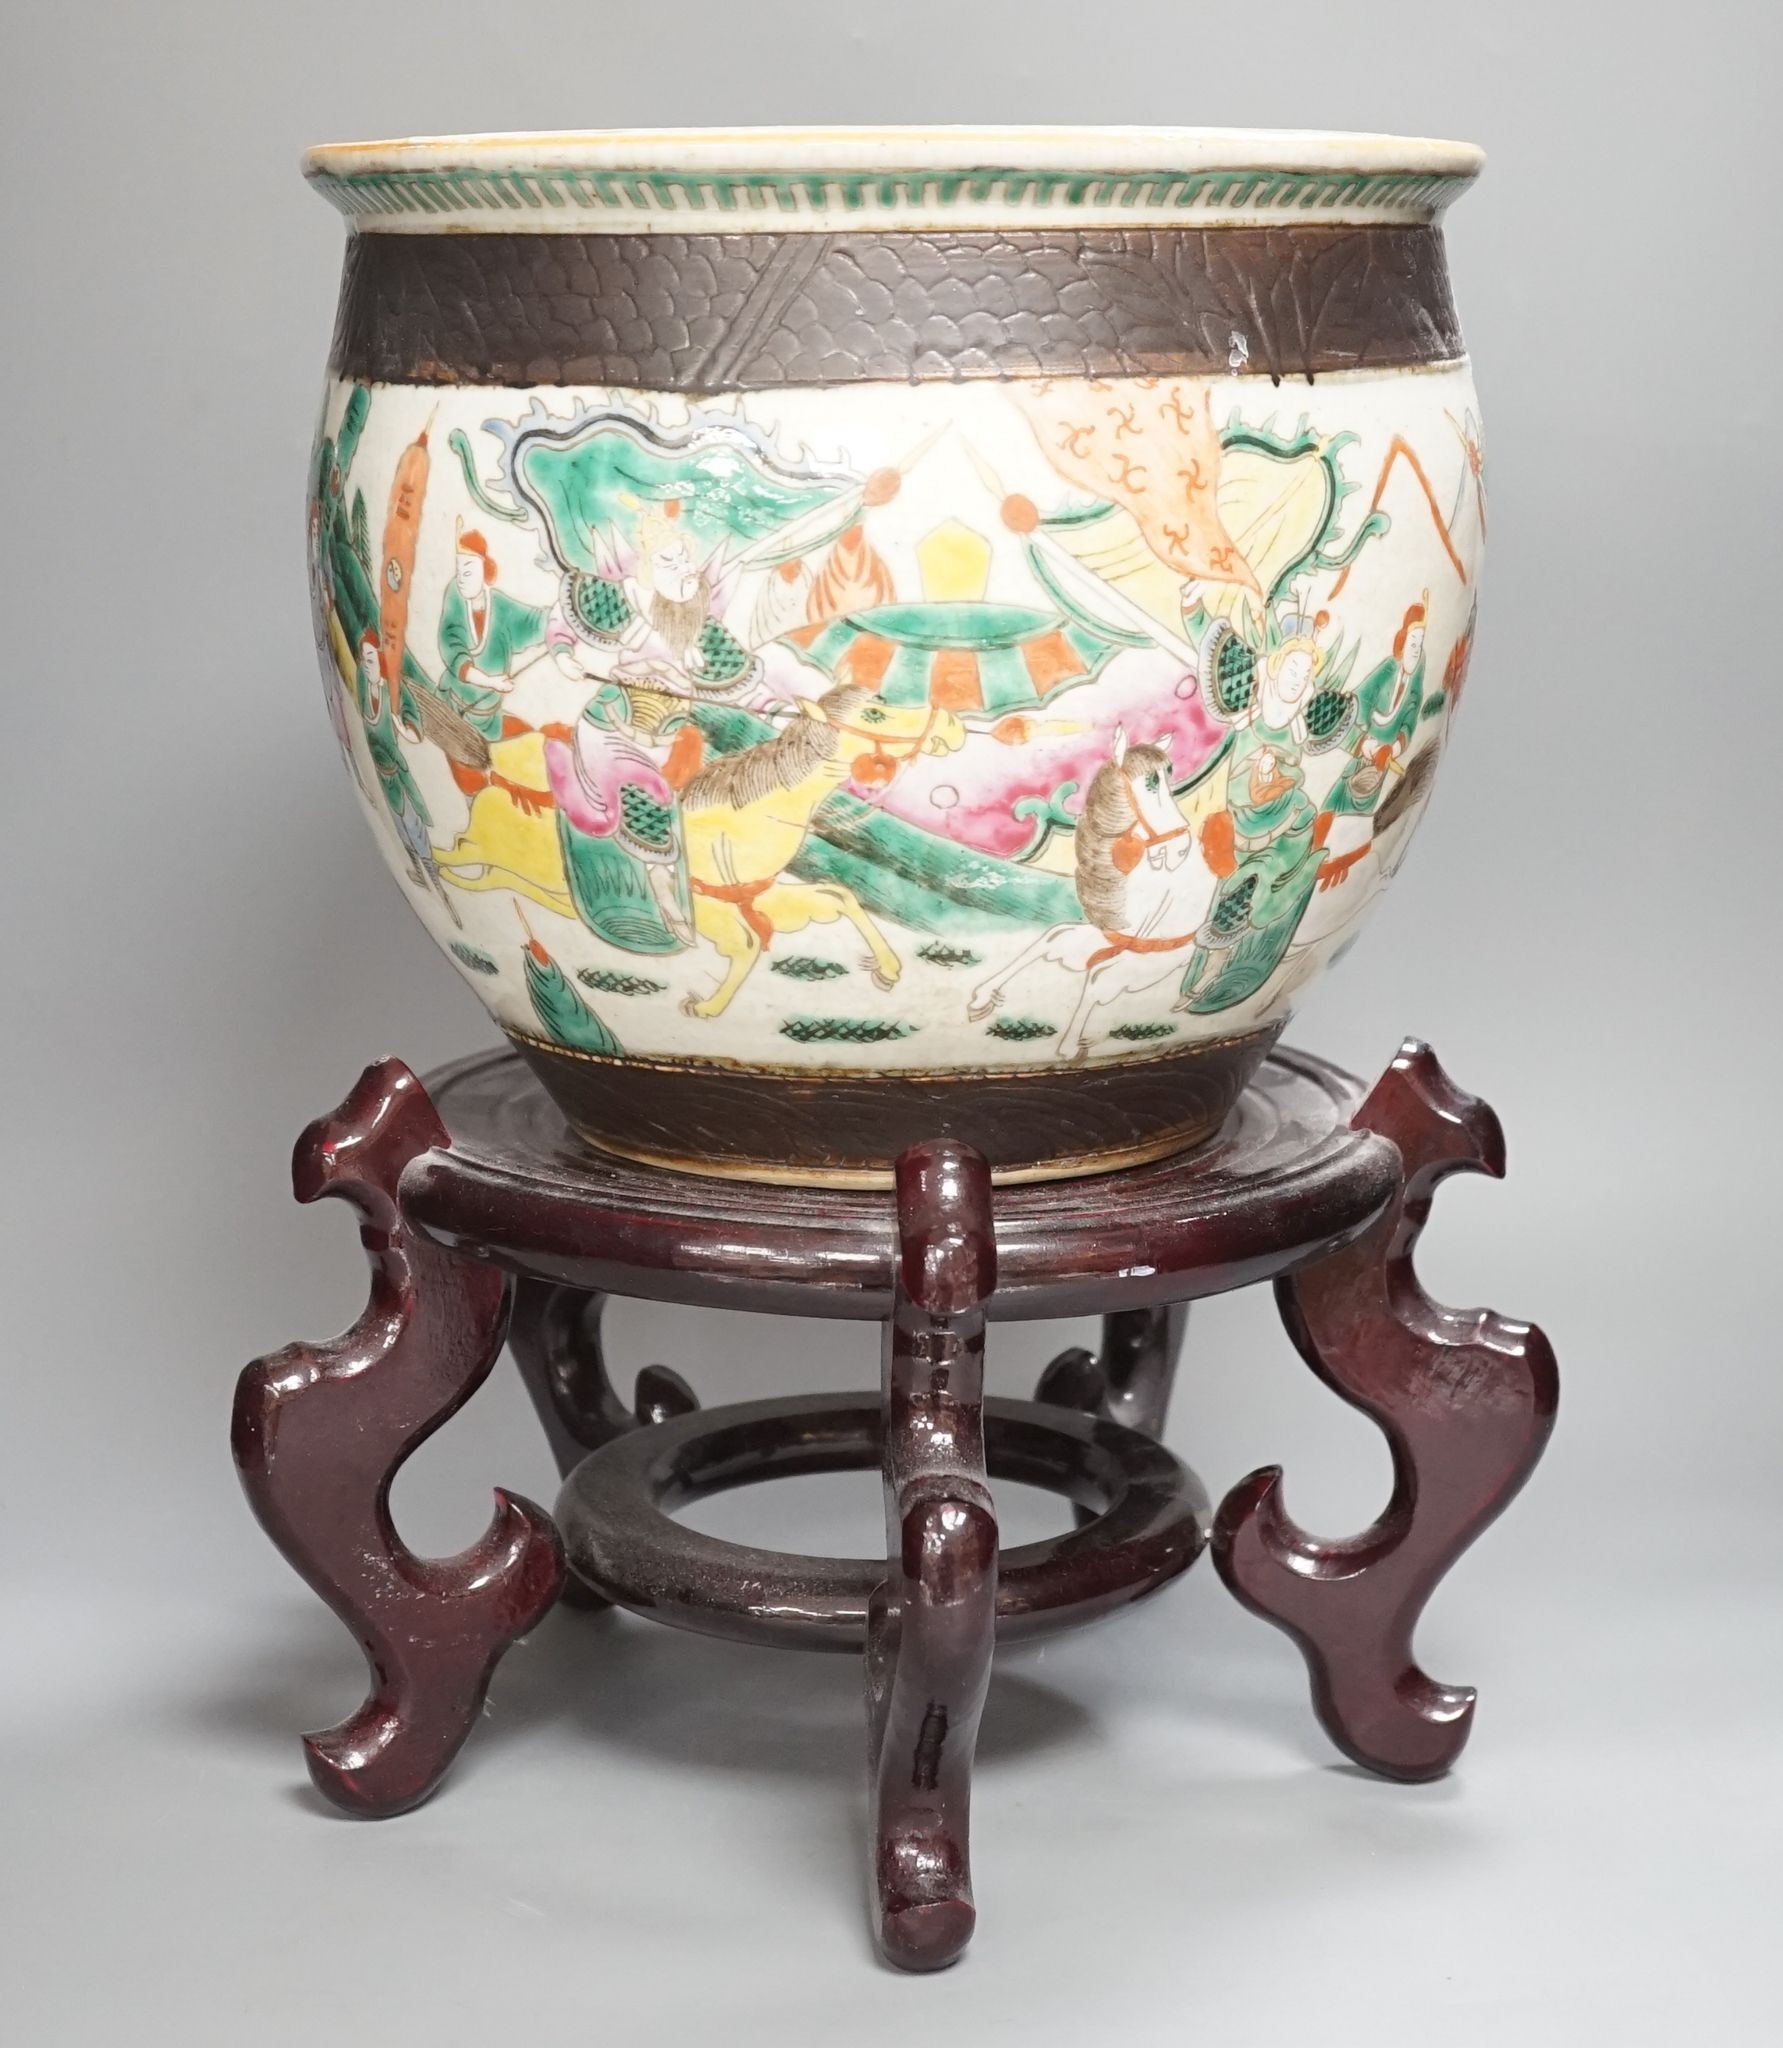 A Chinese famille rose ‘warriors’ jardiniere, late 19th century, wooden stand, 42 cms high including stand.